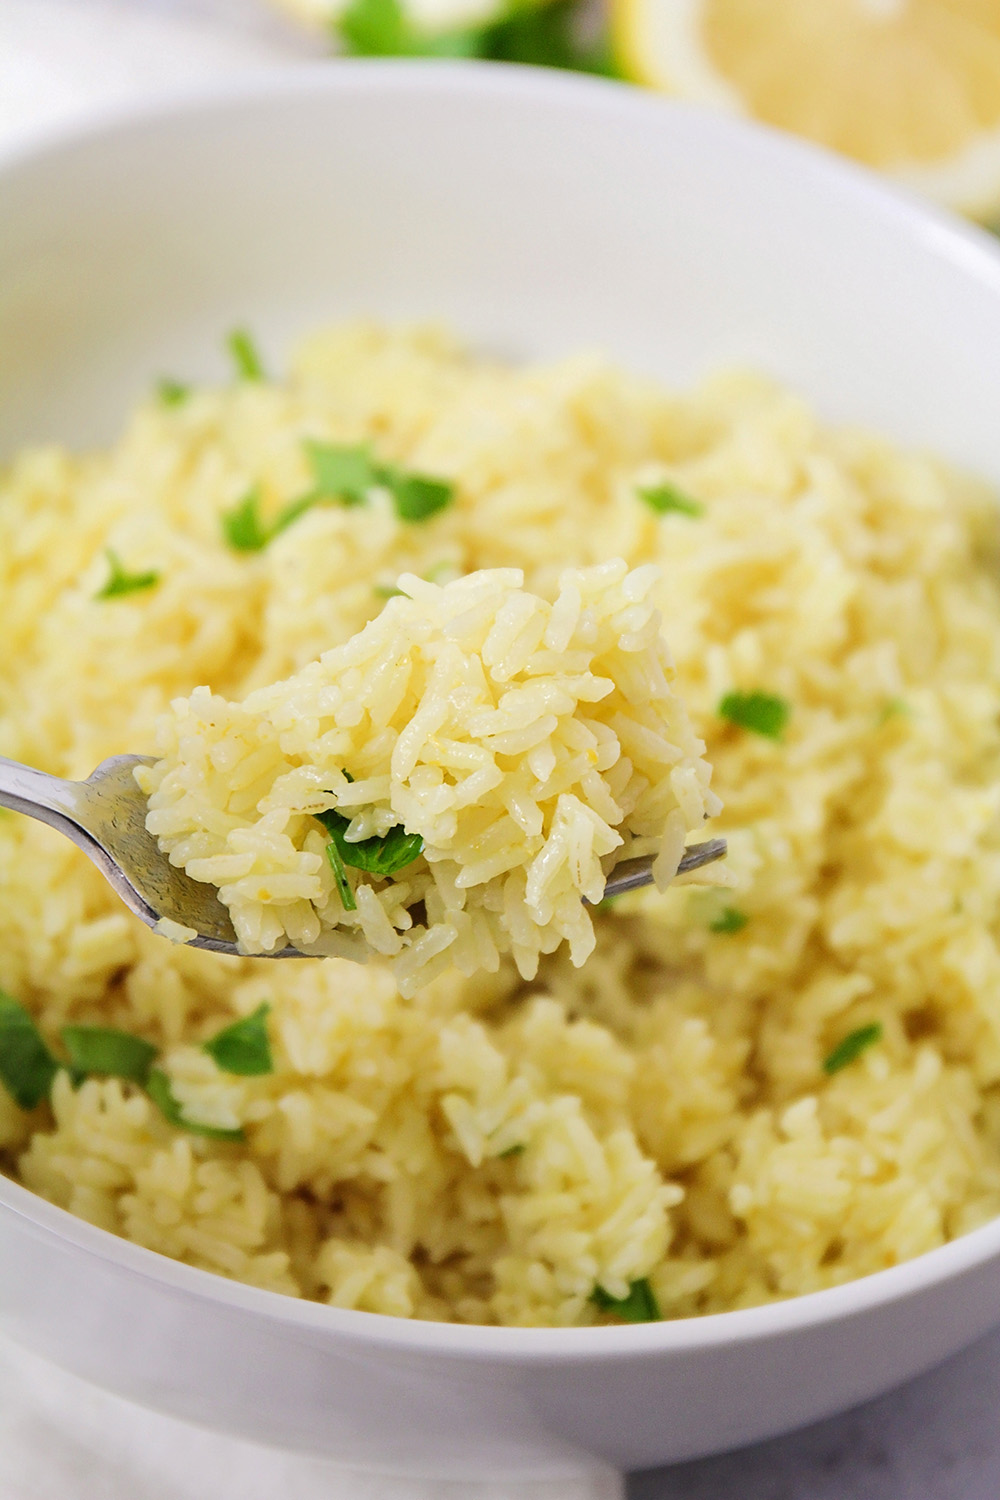 This zesty and flavorful lemon rice is so quick and easy to make in the Instant Pot. It's the perfect side dish!